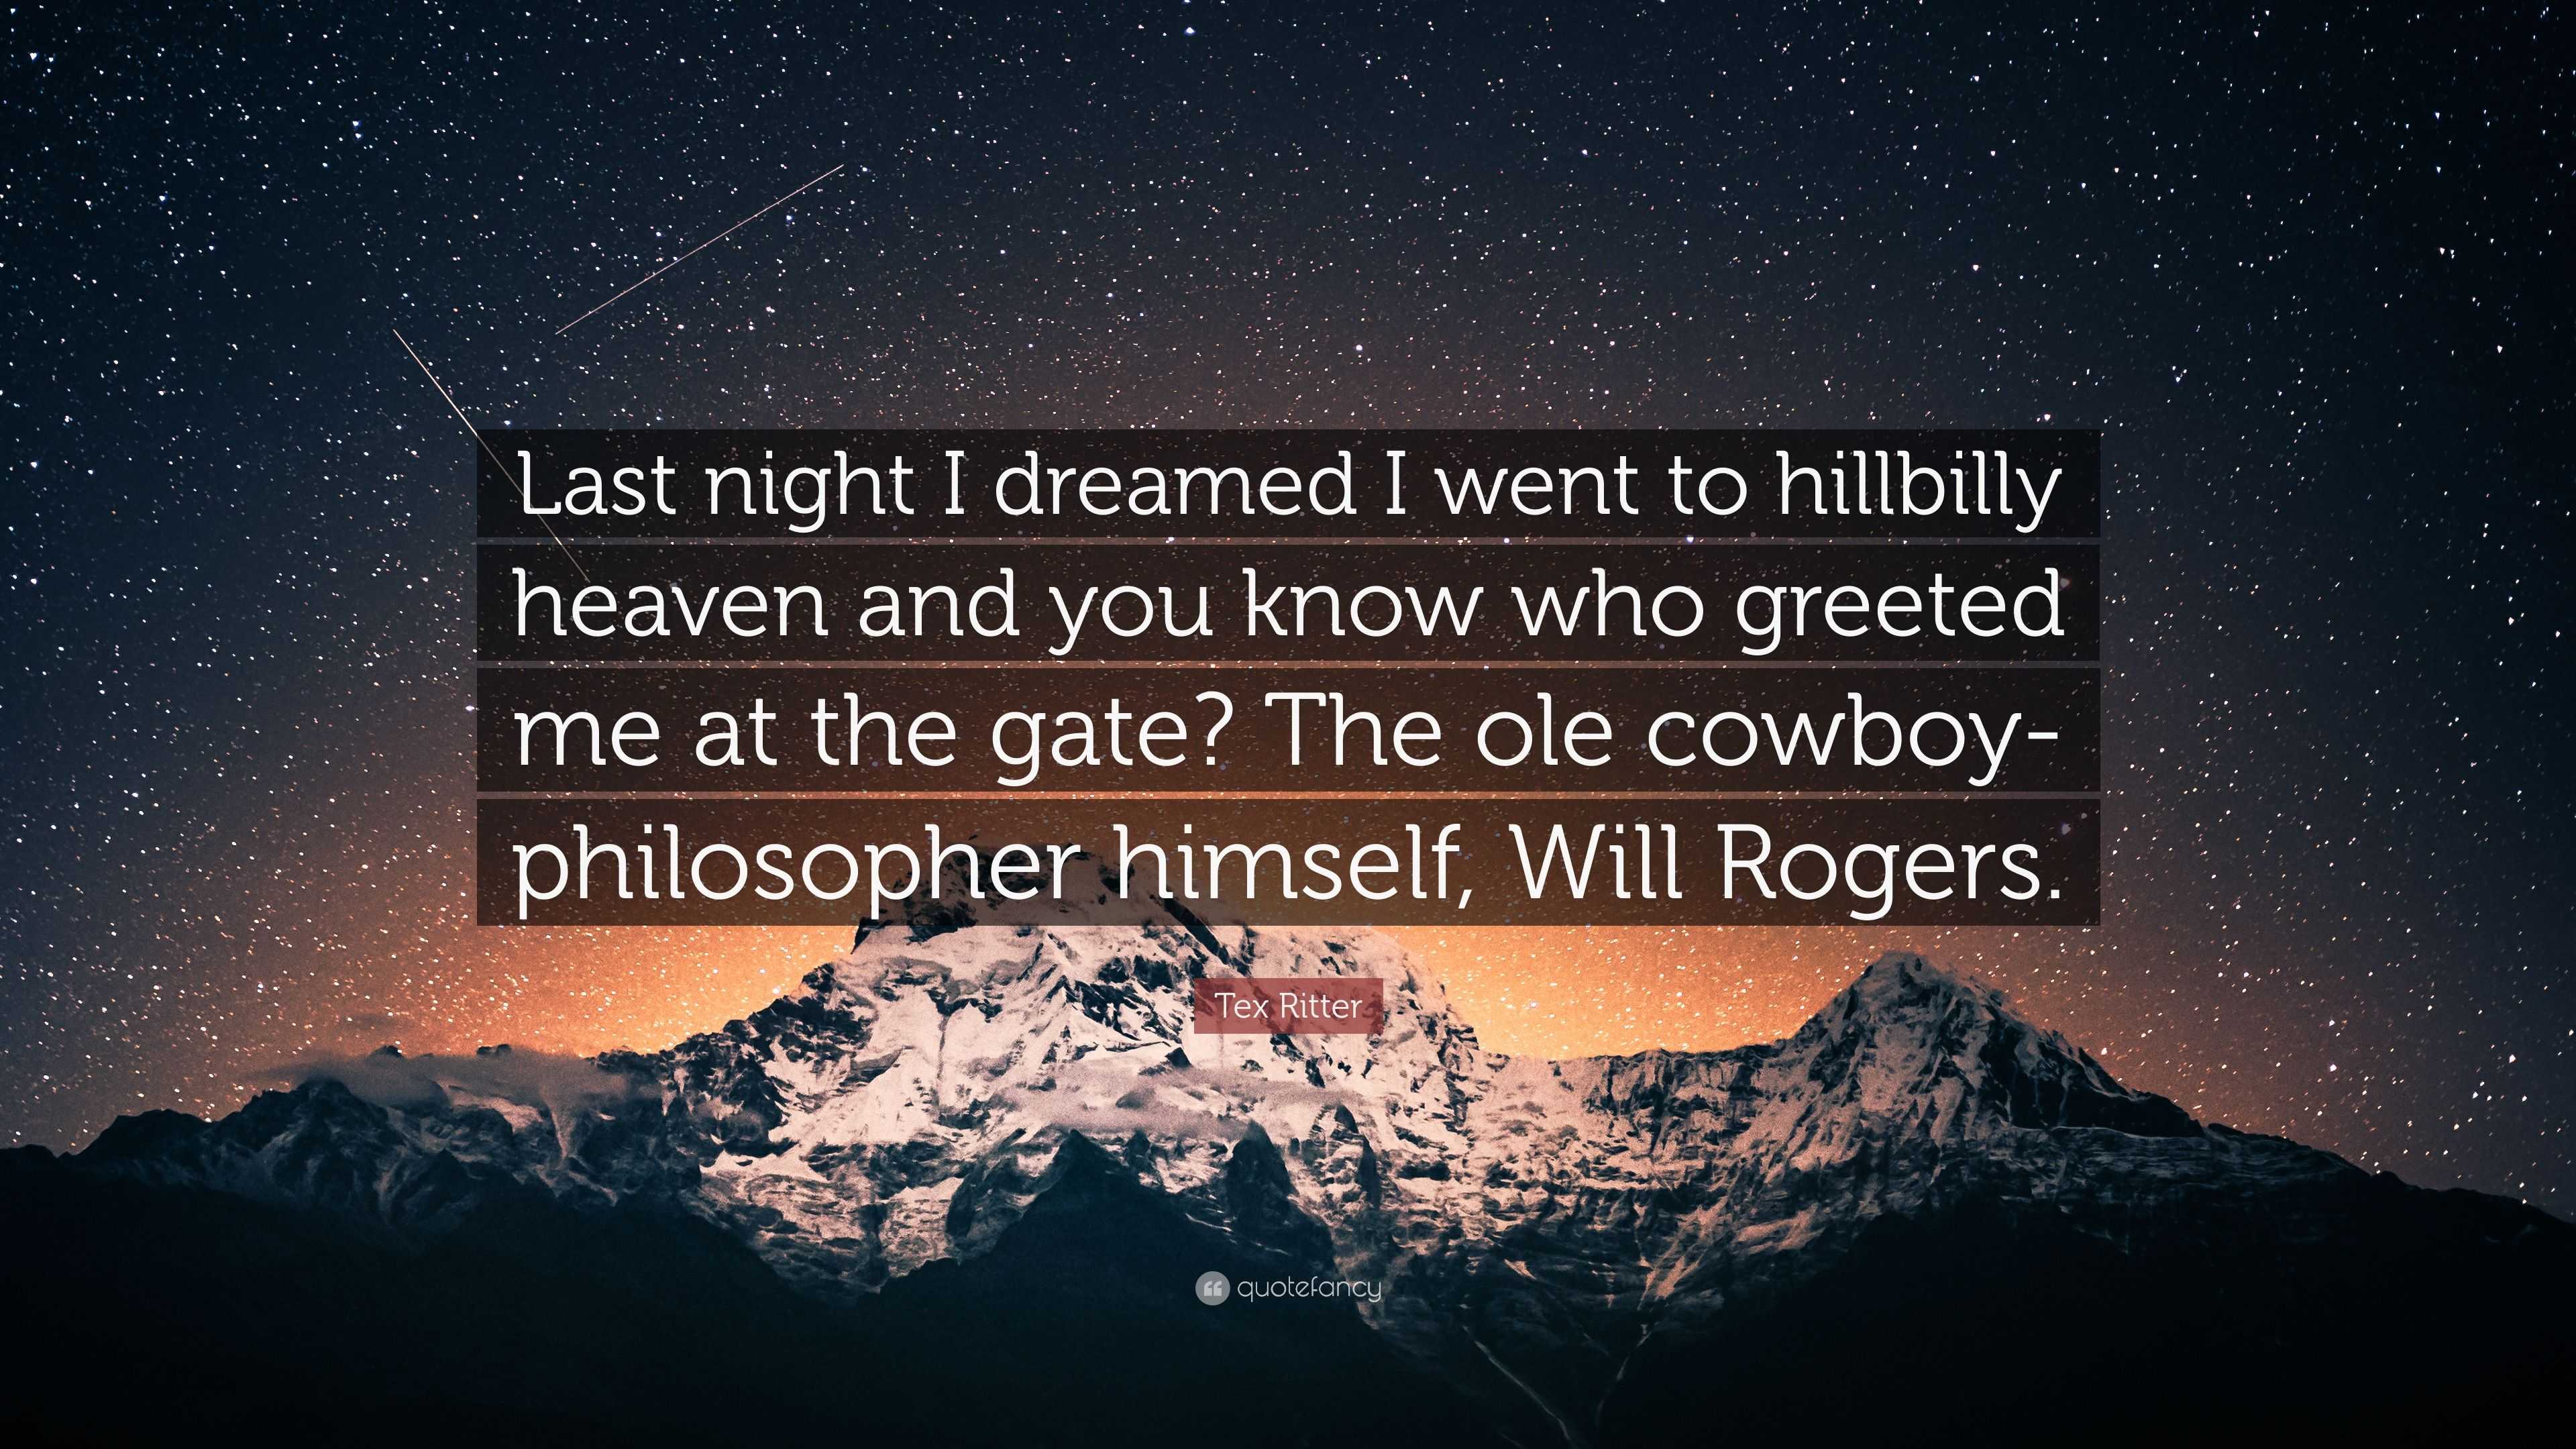 Tex Ritter Quote: “Last night I dreamed I went to hillbilly heaven and you  know who greeted me at the gate? The ole cowboy-philosopher hims”